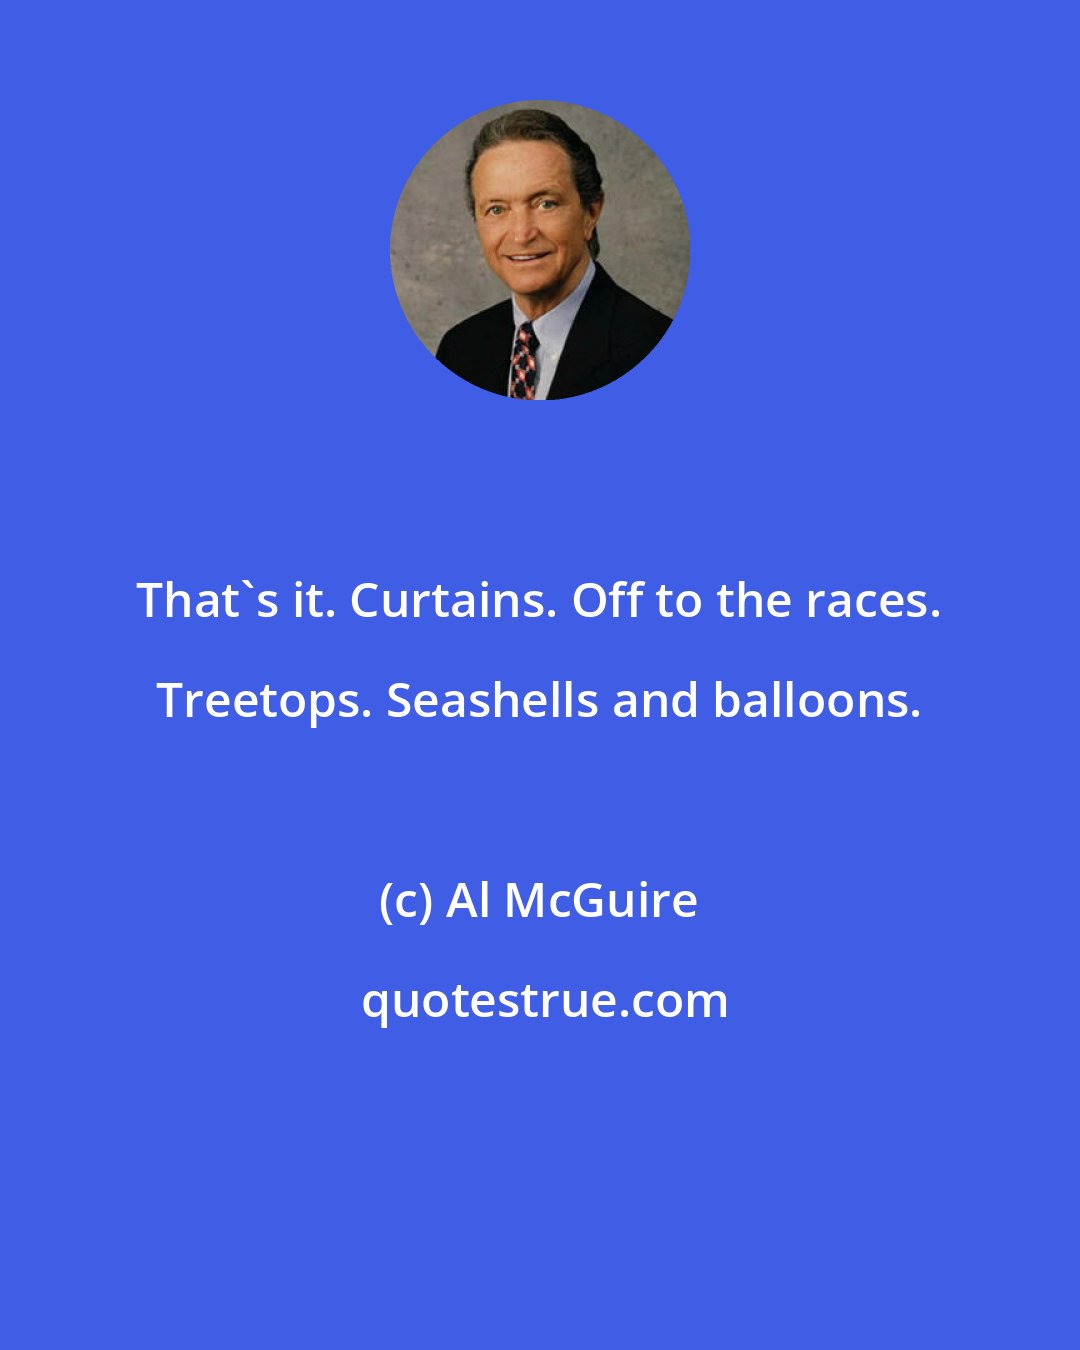 Al McGuire: That's it. Curtains. Off to the races. Treetops. Seashells and balloons.